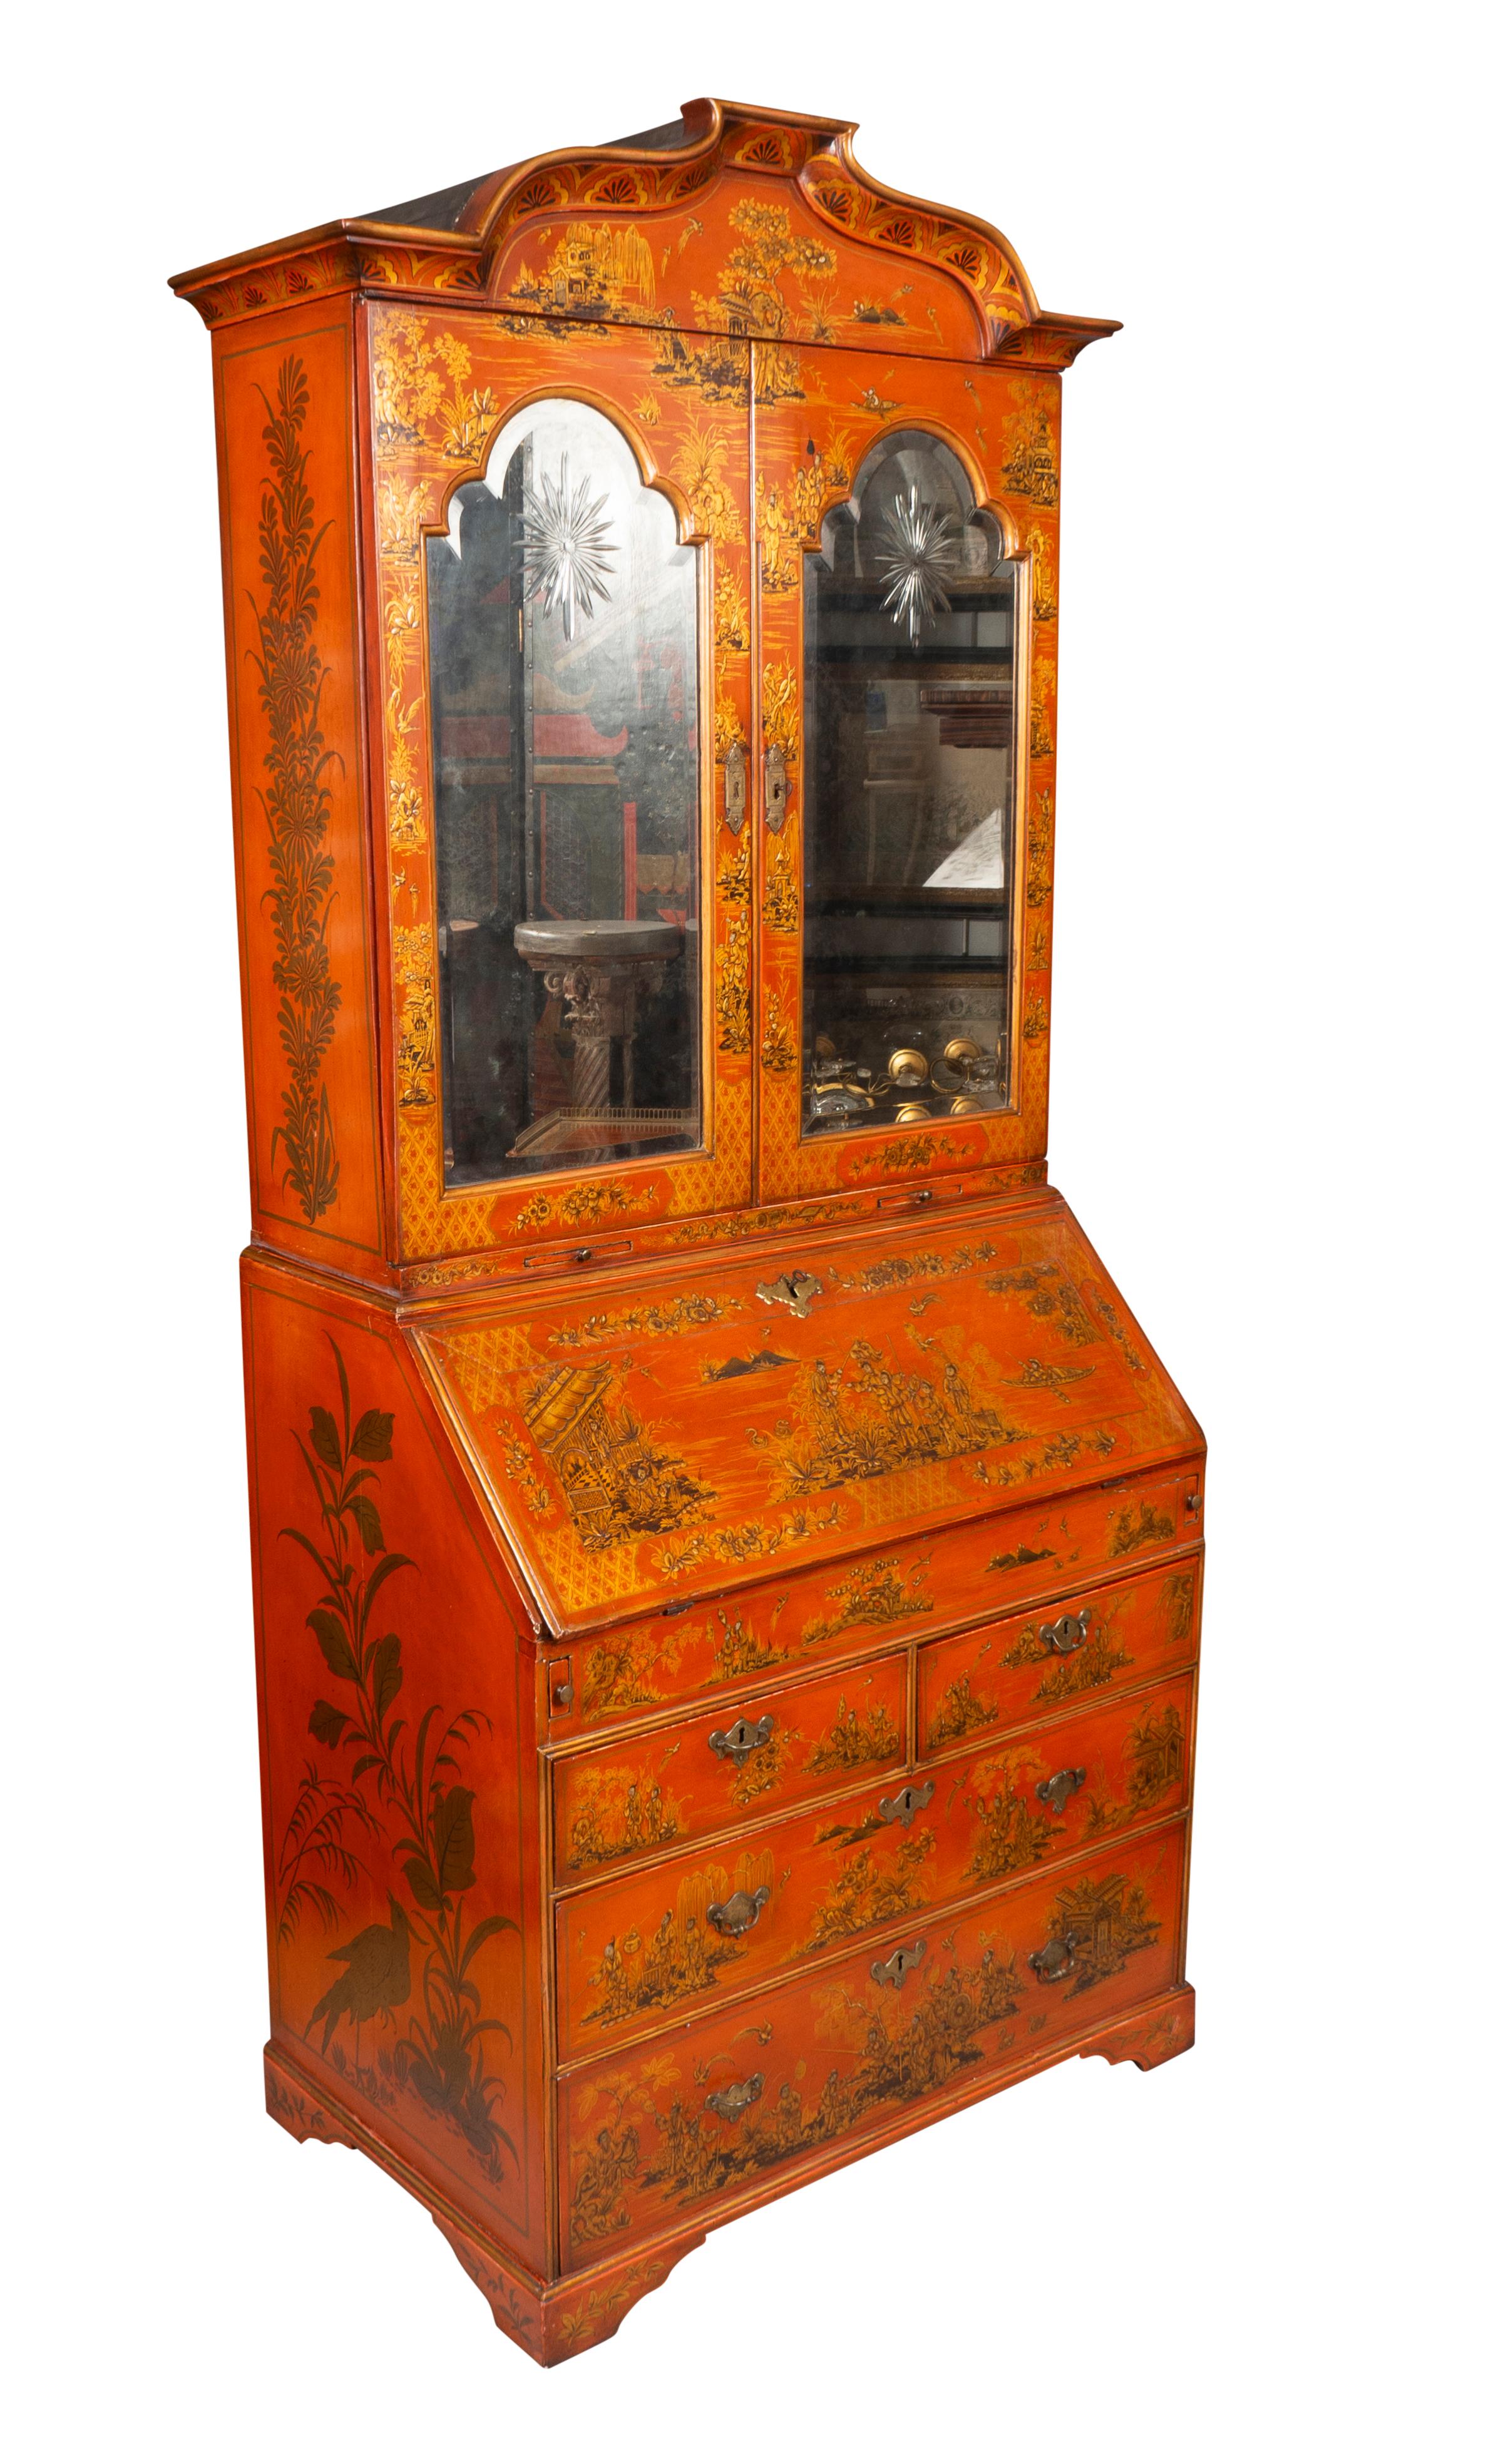 The case 18th century with later scarlet Japanned decoration. With shaped arched pediment over a pair of arched doors with beveled glass. Opening to an elaborate interior with various drawers and doors, cubbys etc. Two candle slides. The desk